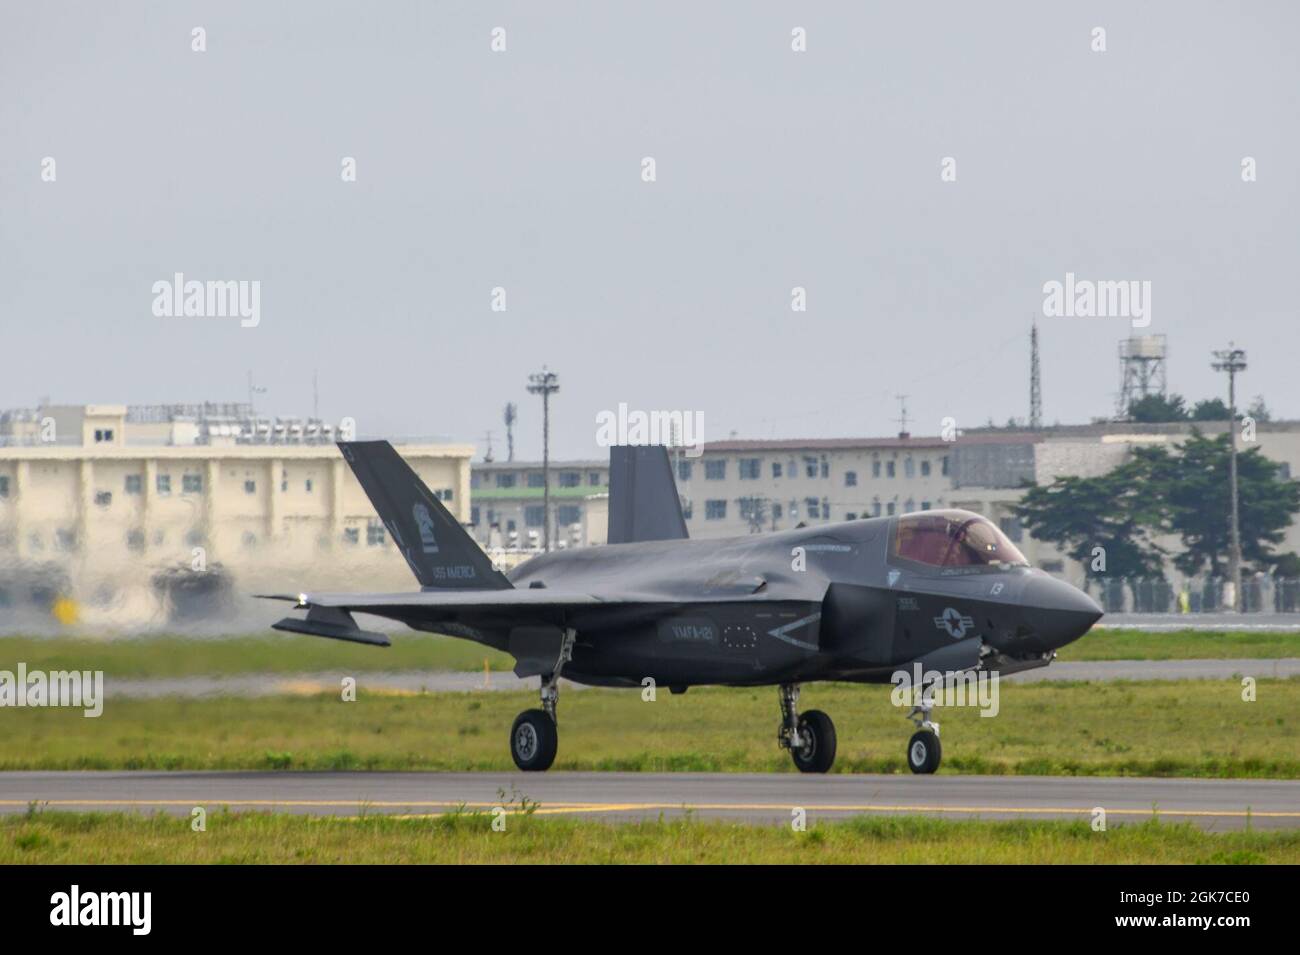 MISAWA, Japan (Aug. 24, 2021) – An F-35B Lightning II, assigned to the 'Green Knights' of Marine Fighter Attack Squadron VMFA-121, prepares to launch at Misawa Air Base. The F-35B Lightning II is specifically designed to operate from amphibious ships where VMFA-121 has been supporting the 31st Marine Expeditionary Unit on rotational deployments. Stock Photo